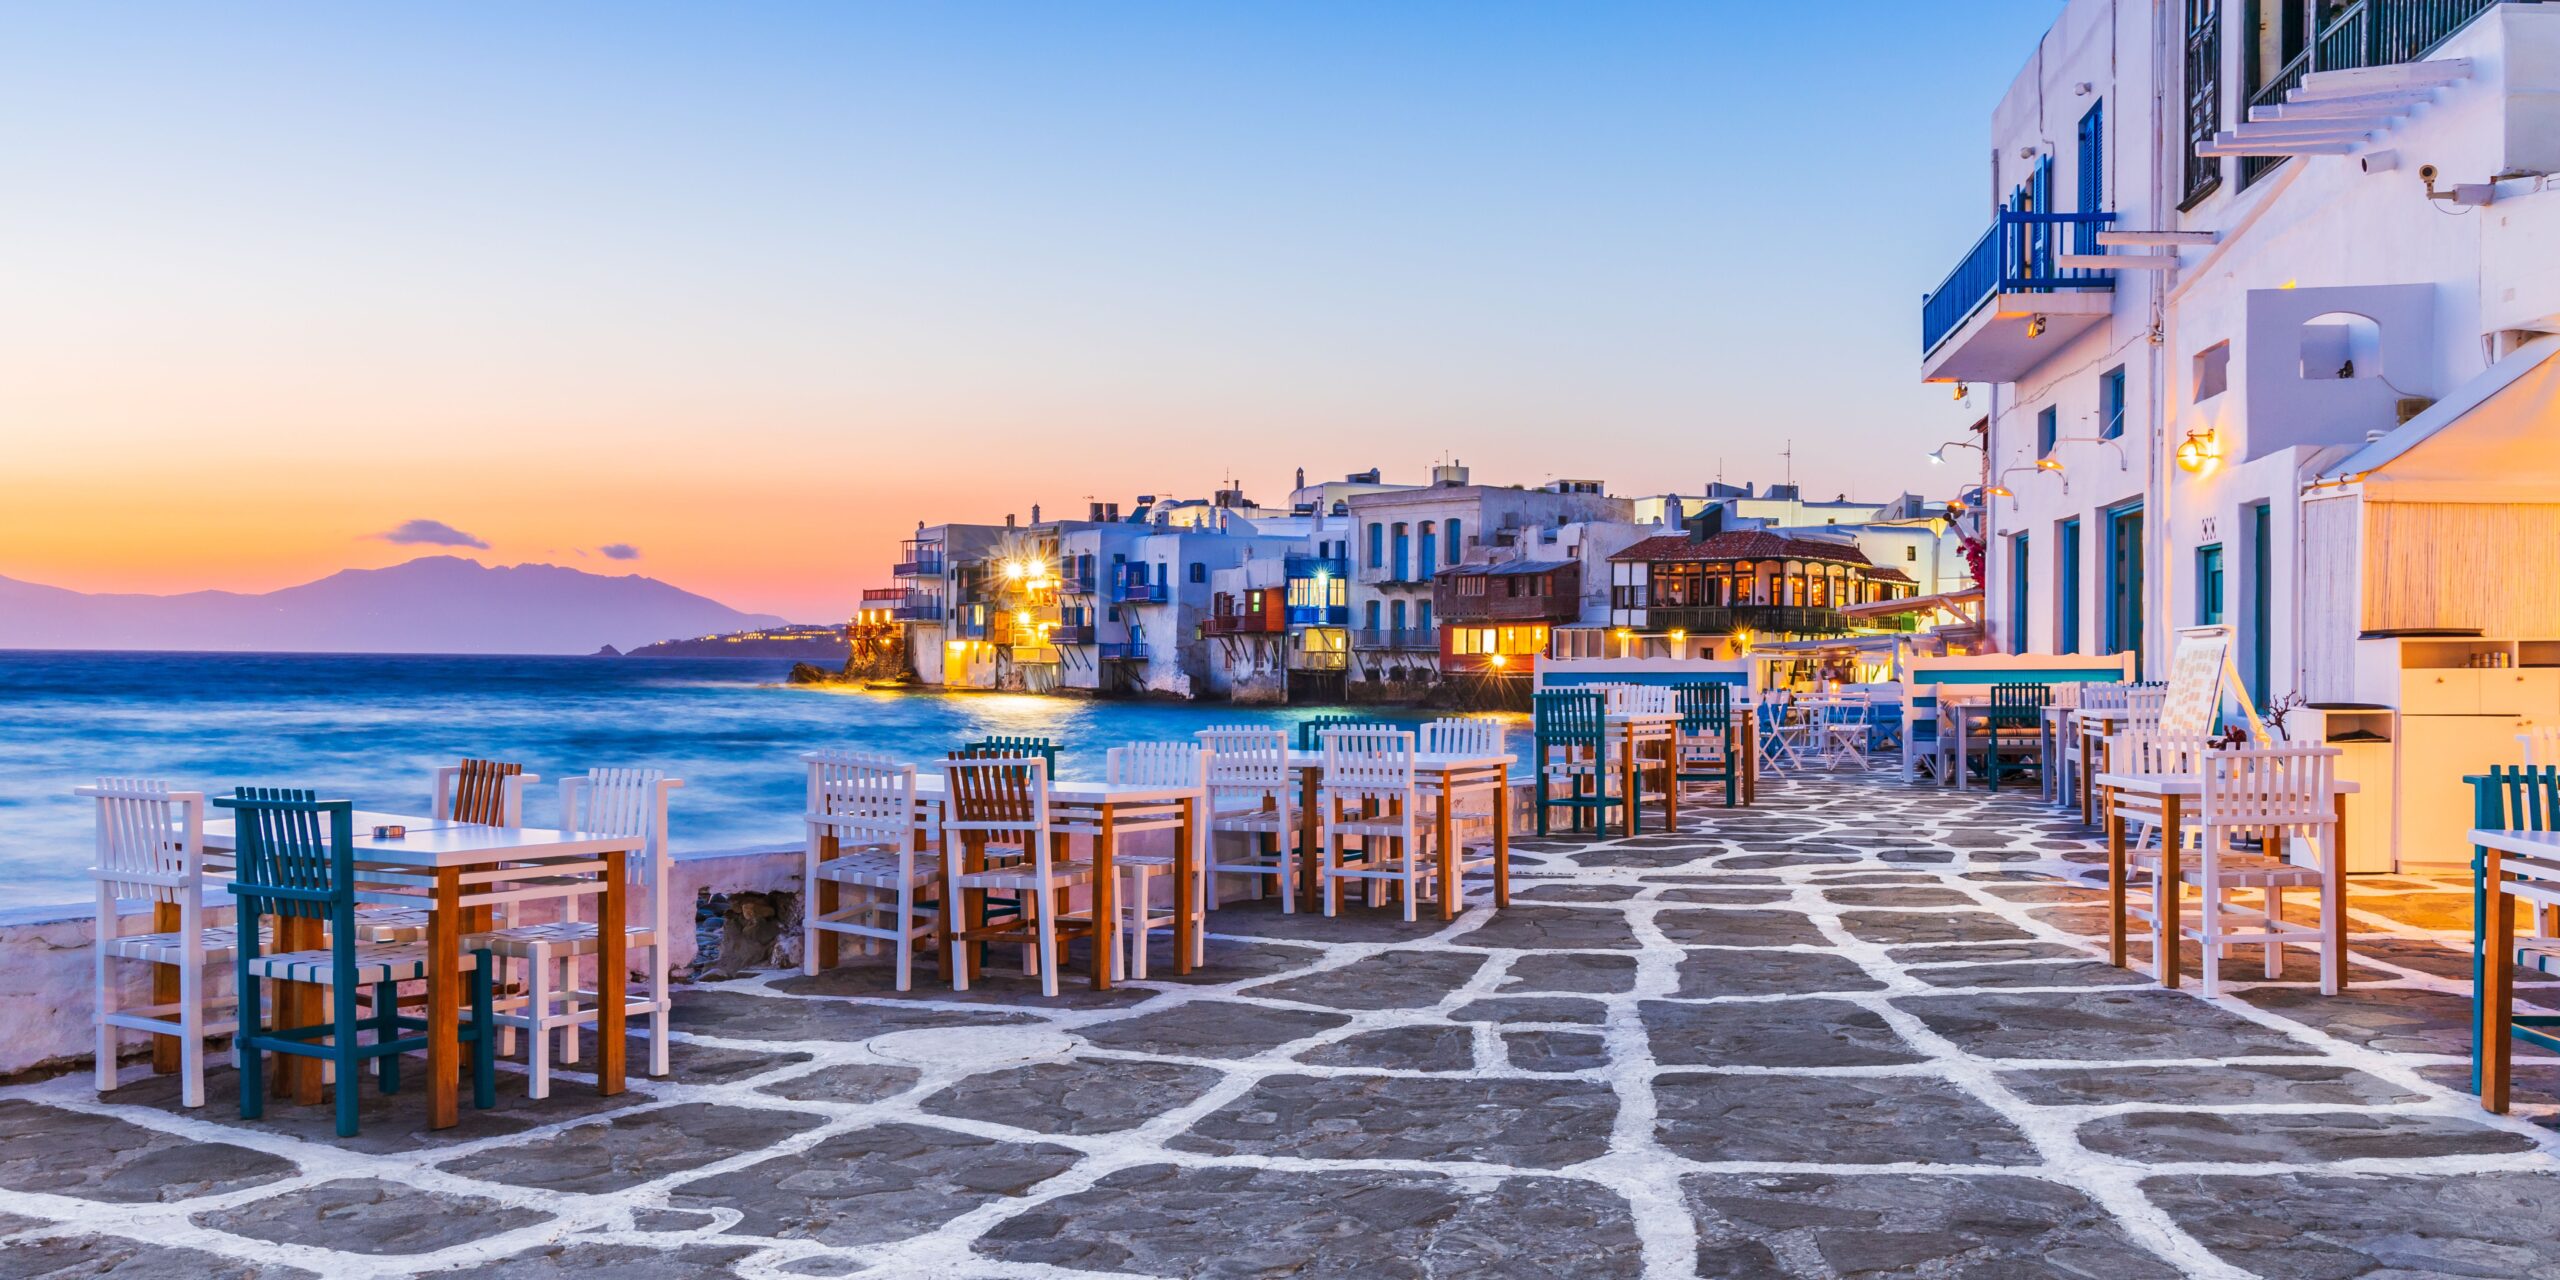 Evening falls on the charming seaside dining area in Little Venice, Mykonos, with tables set up for a beautiful night ahead.